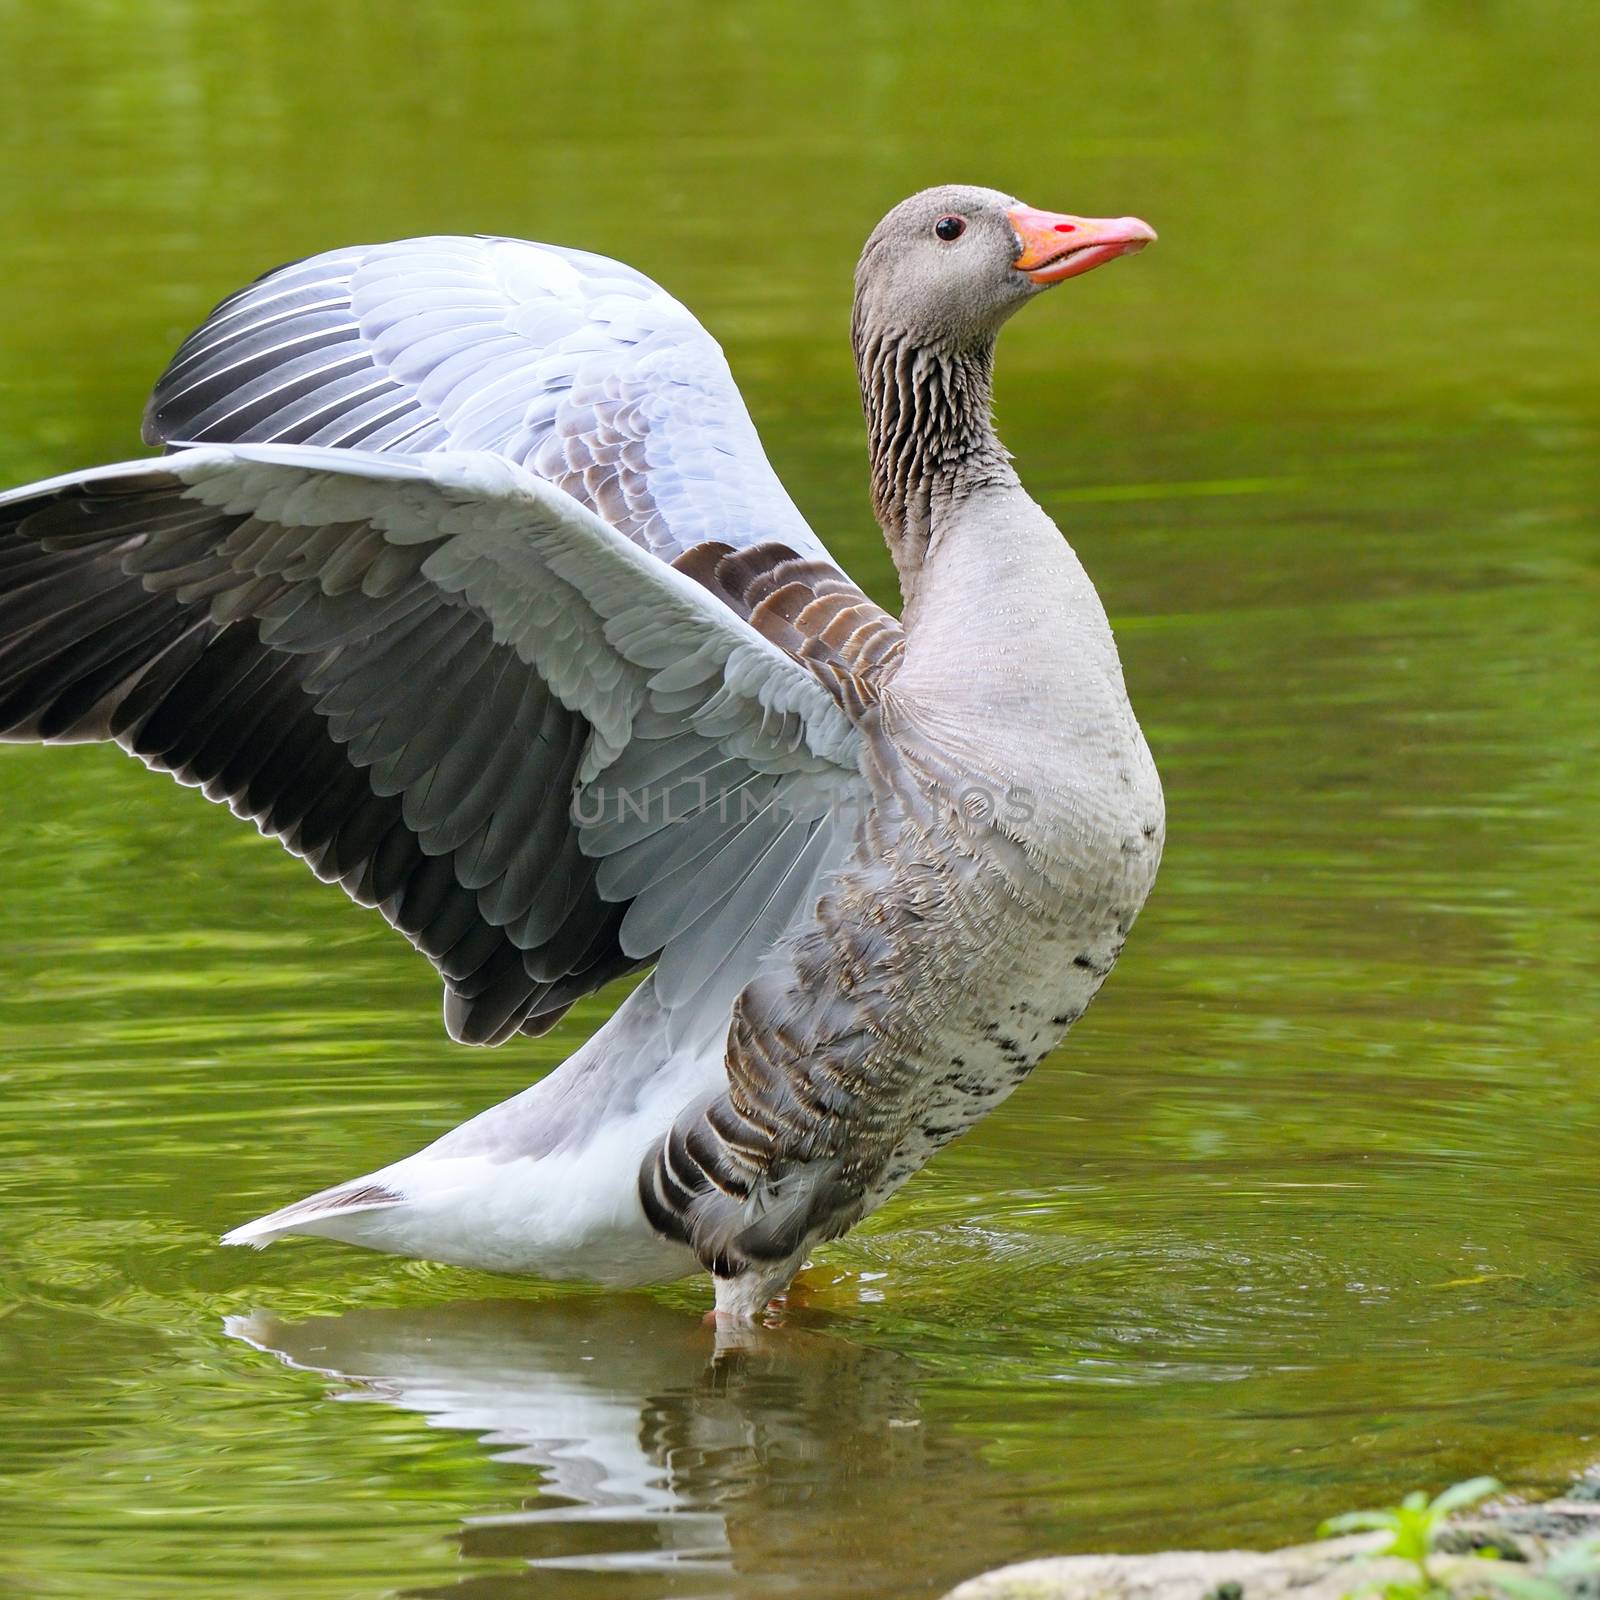 goose with outstretched wings